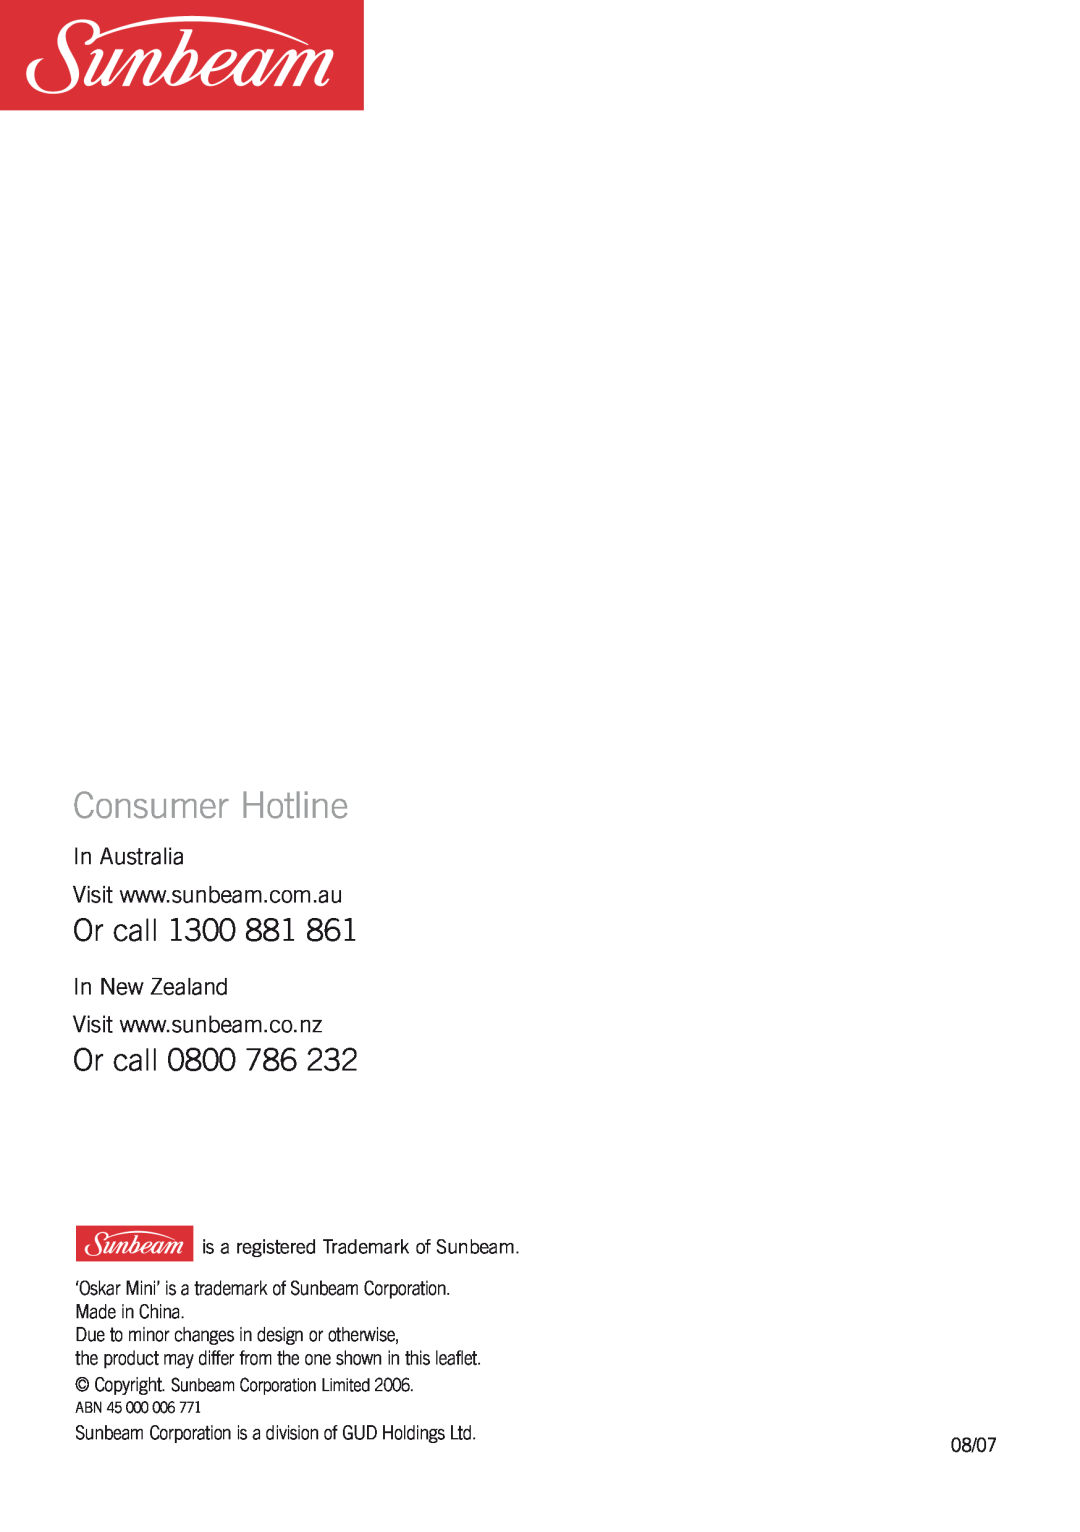 Sunbeam LC3200 manual Consumer Hotline, Or call 0800, is a registered Trademark of Sunbeam, 08/07, Abn 